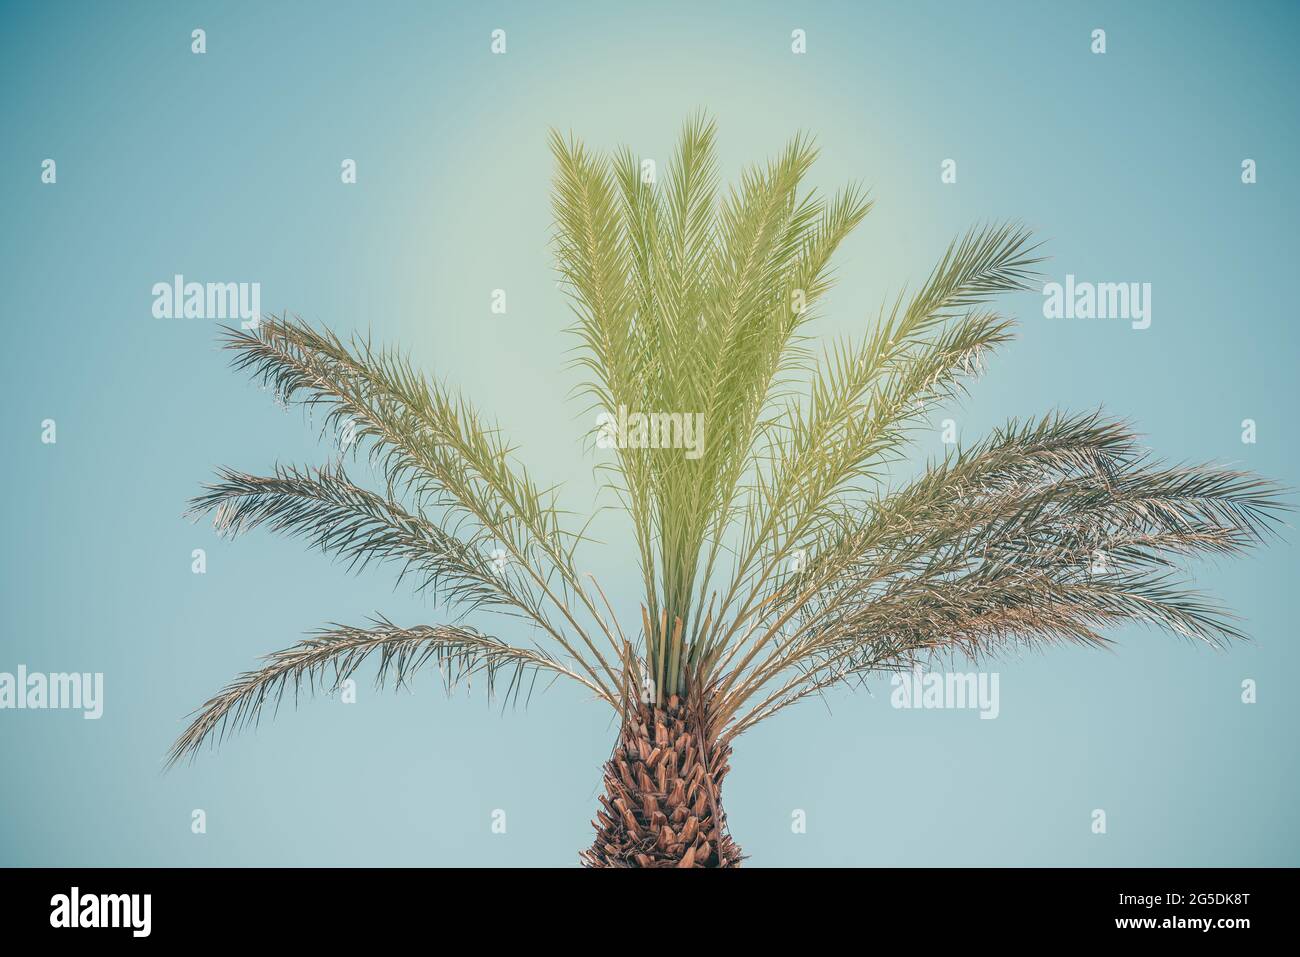 Tropical Palm tree at tropical beach. Vacation, summer holiday concept background. Stock Photo